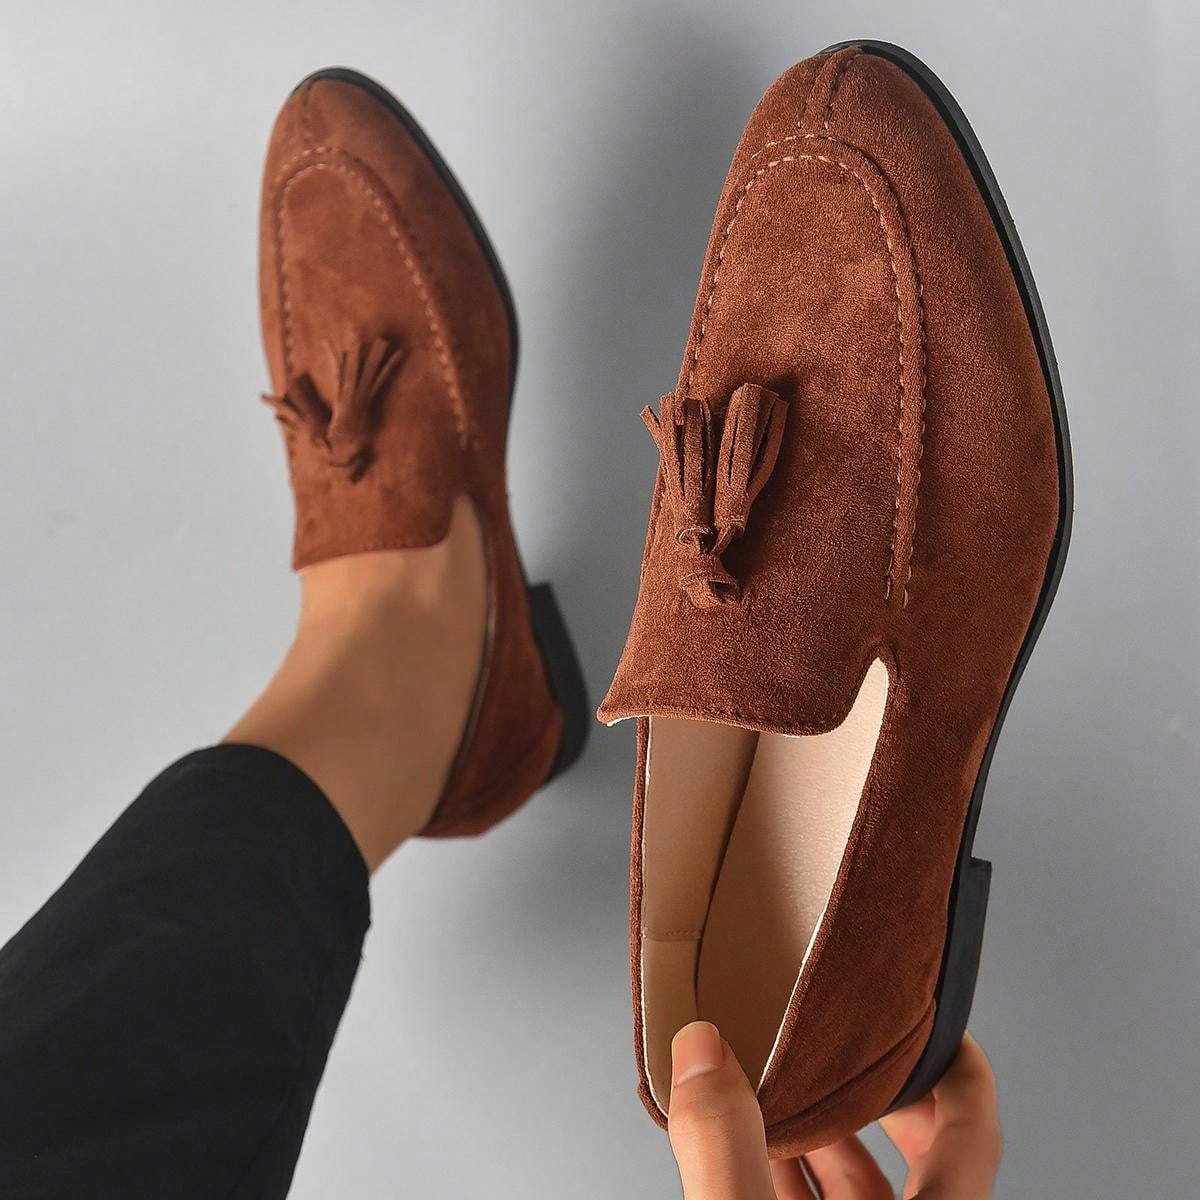 Men's Tassel Loafers, Low-cut Pu Leather Shoes, Casual British One-step Slip-on, Lightweight, Trendy And Versatile